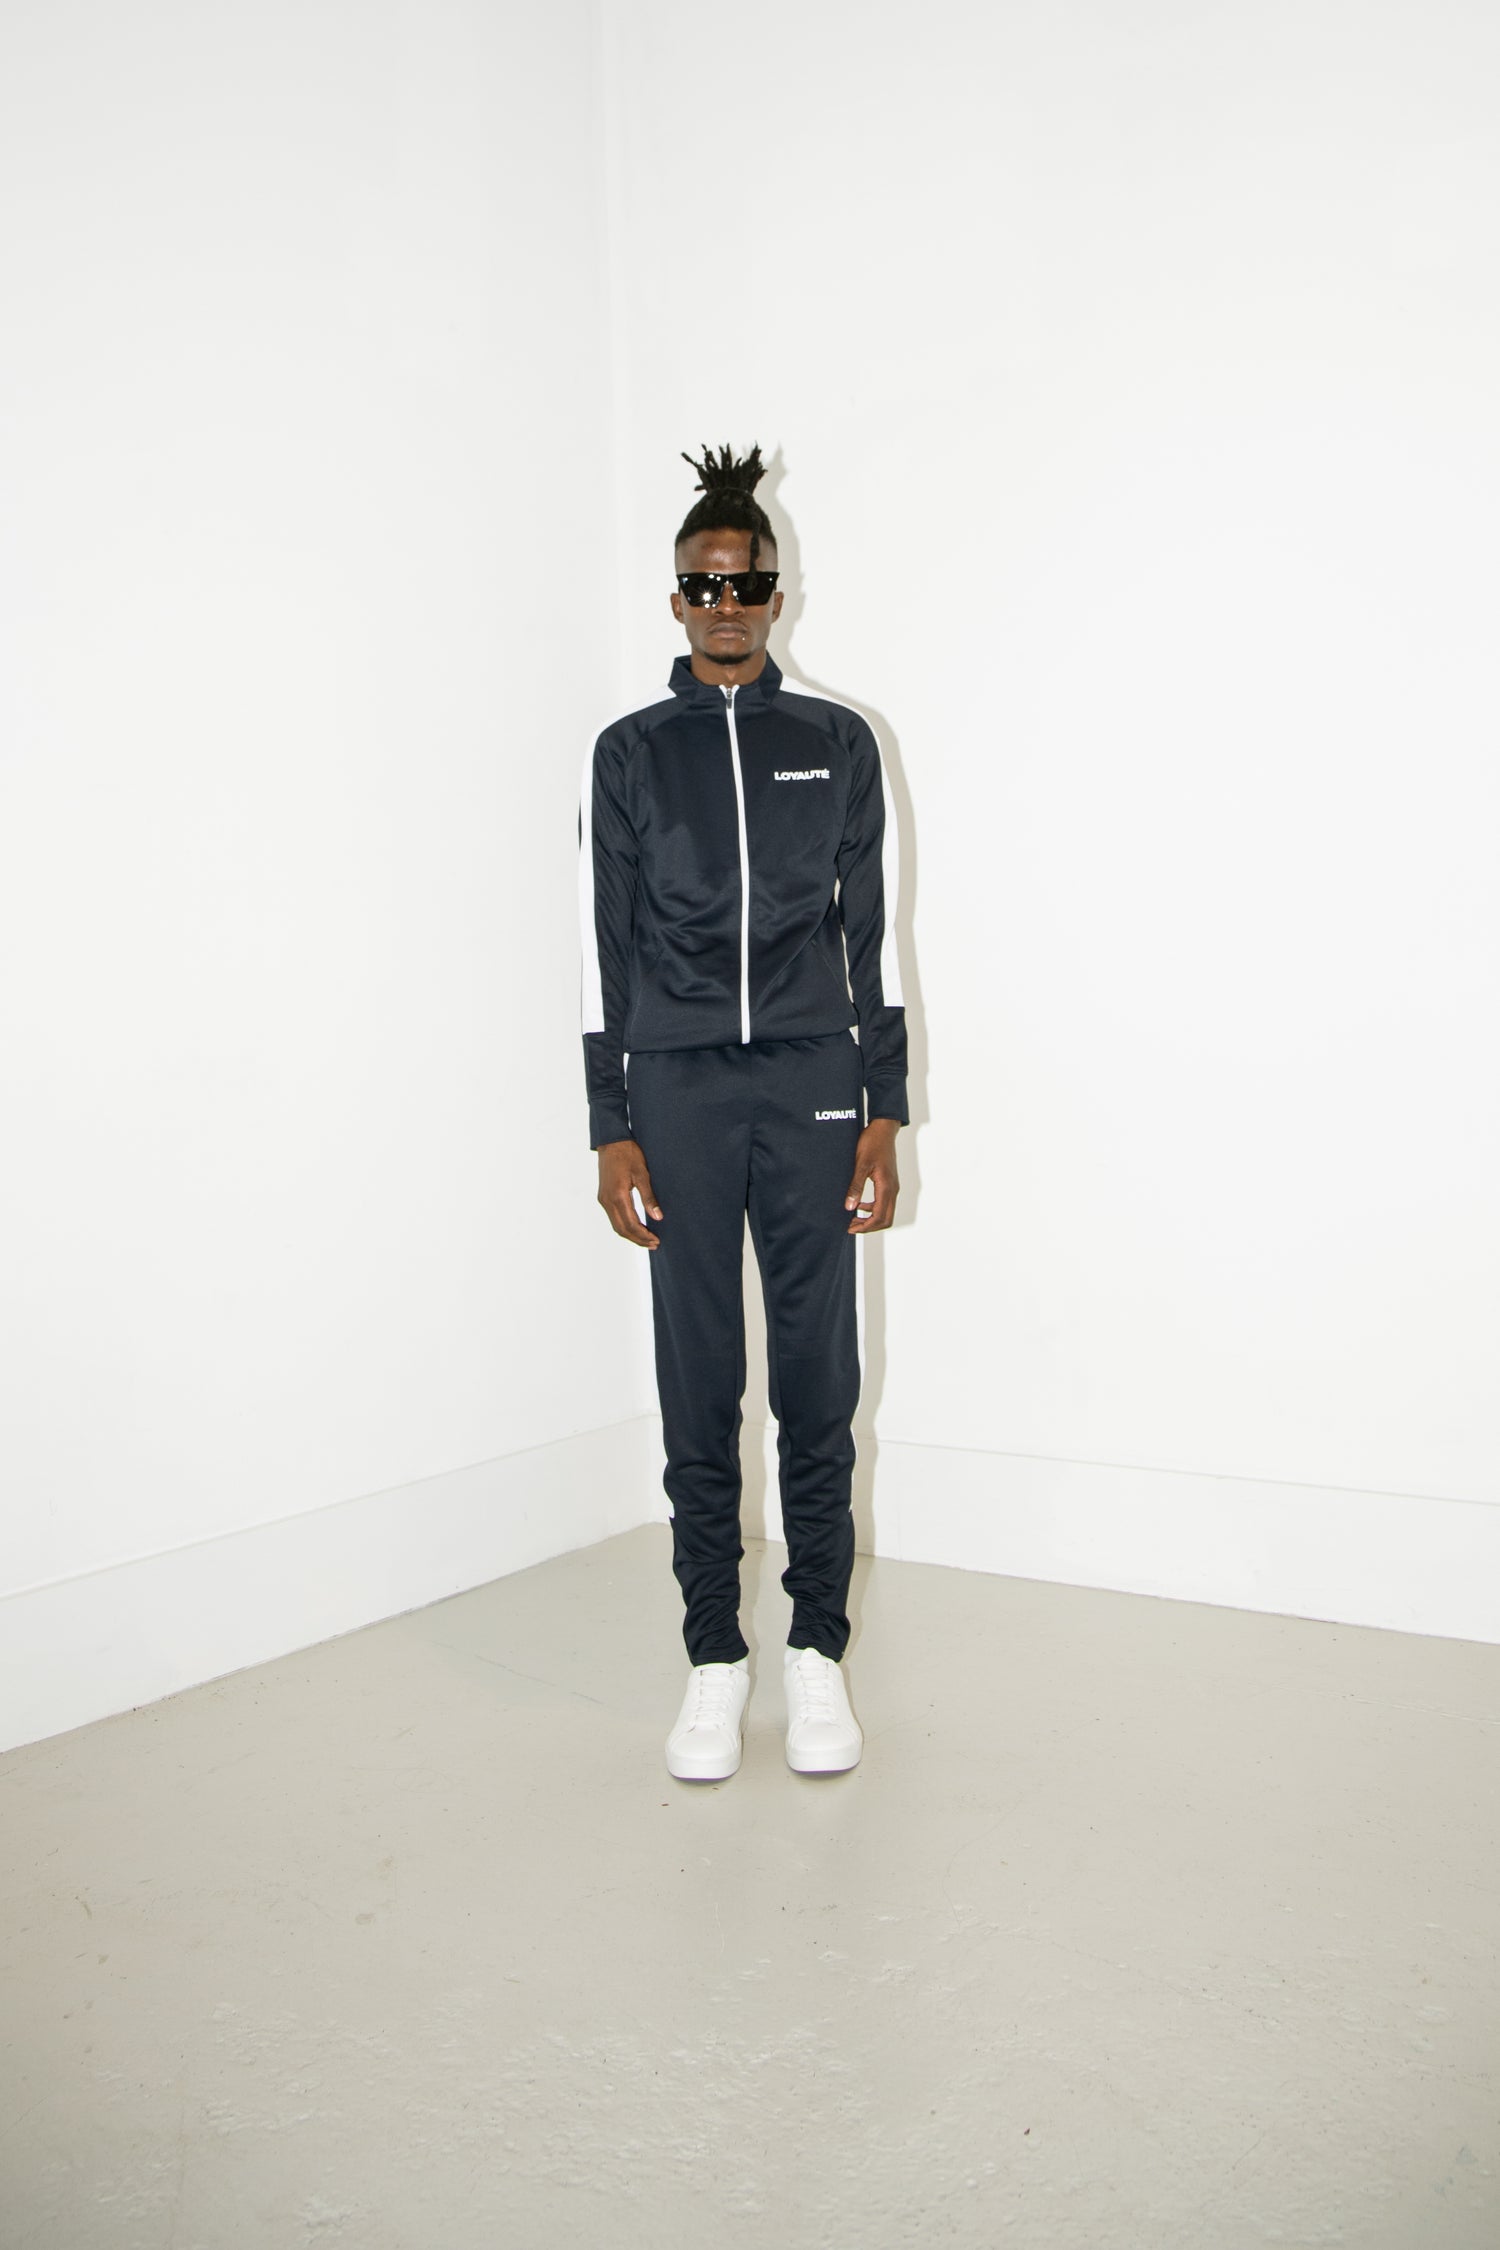 CAPSULE COLLECTION 4 | AW21 Return Of The Mack